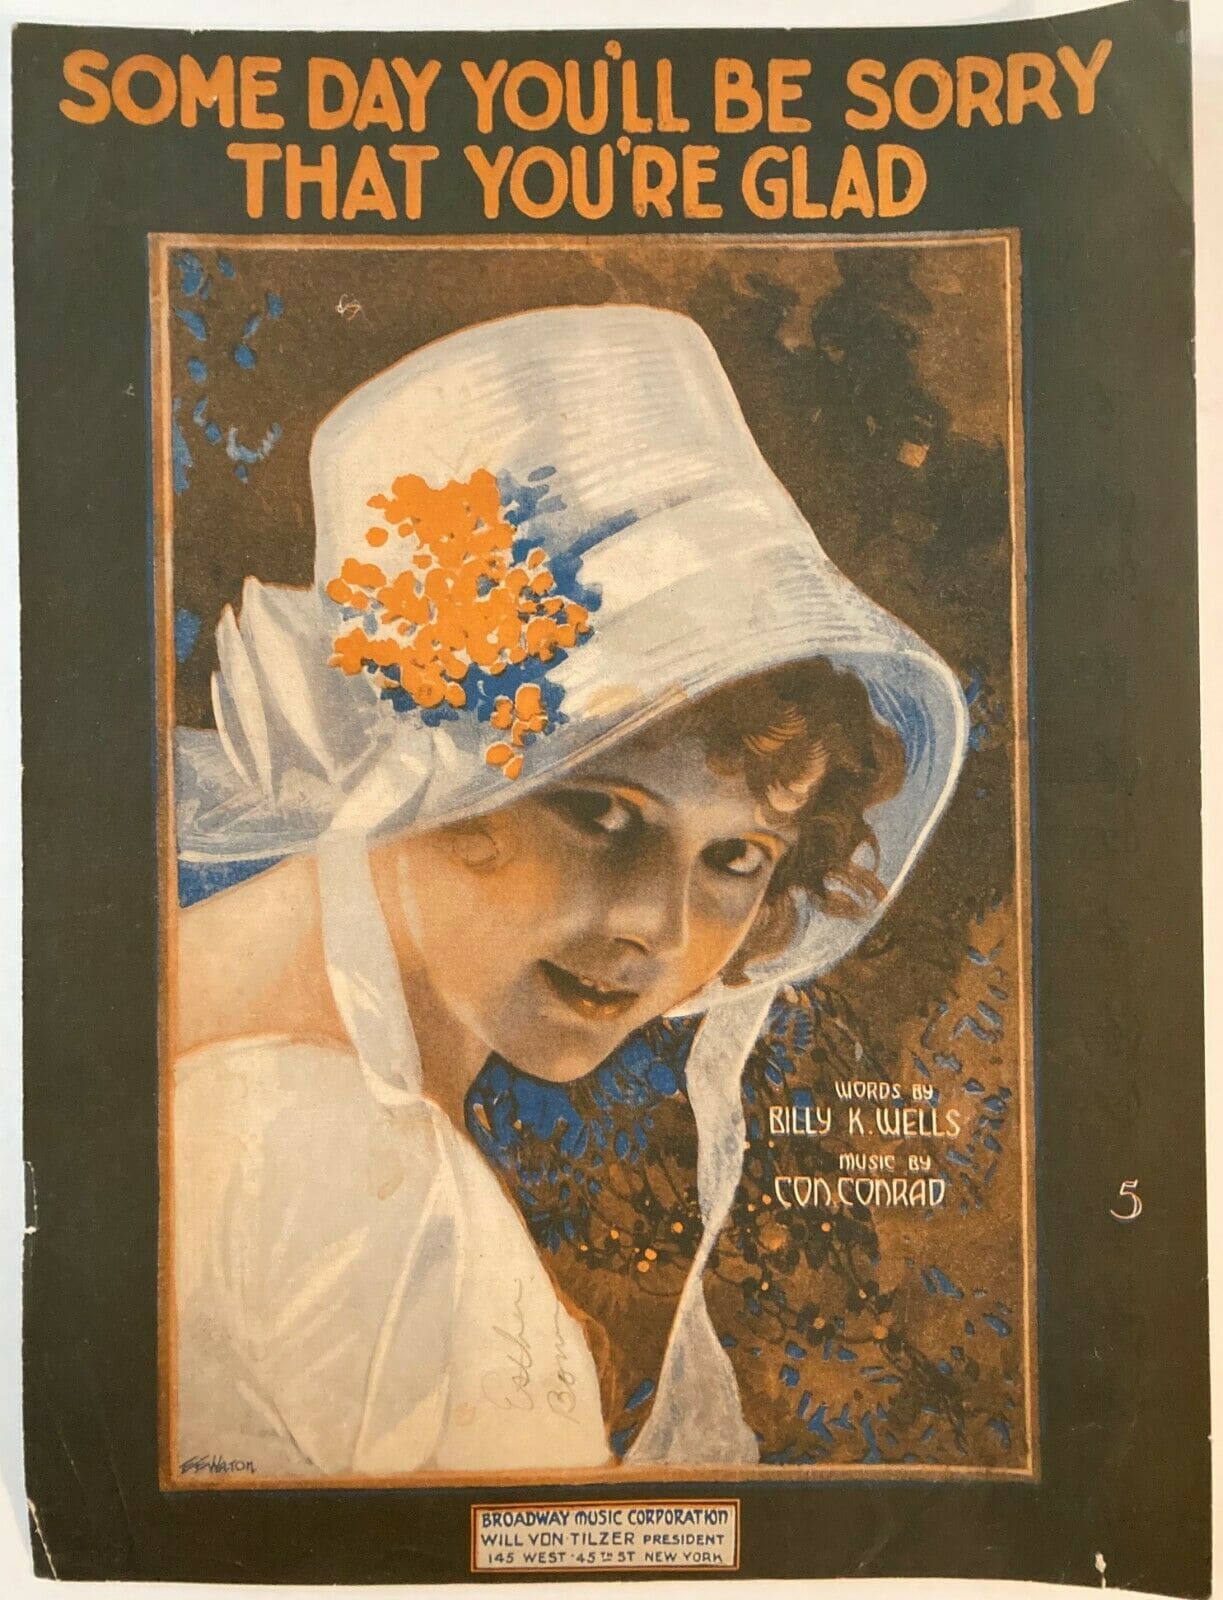 A vintage illustration on the cover of a piece of sheet music depicts a woman peeking out from under the brim of a huge hat, smiling with teeth bared, looking honestly murdery.